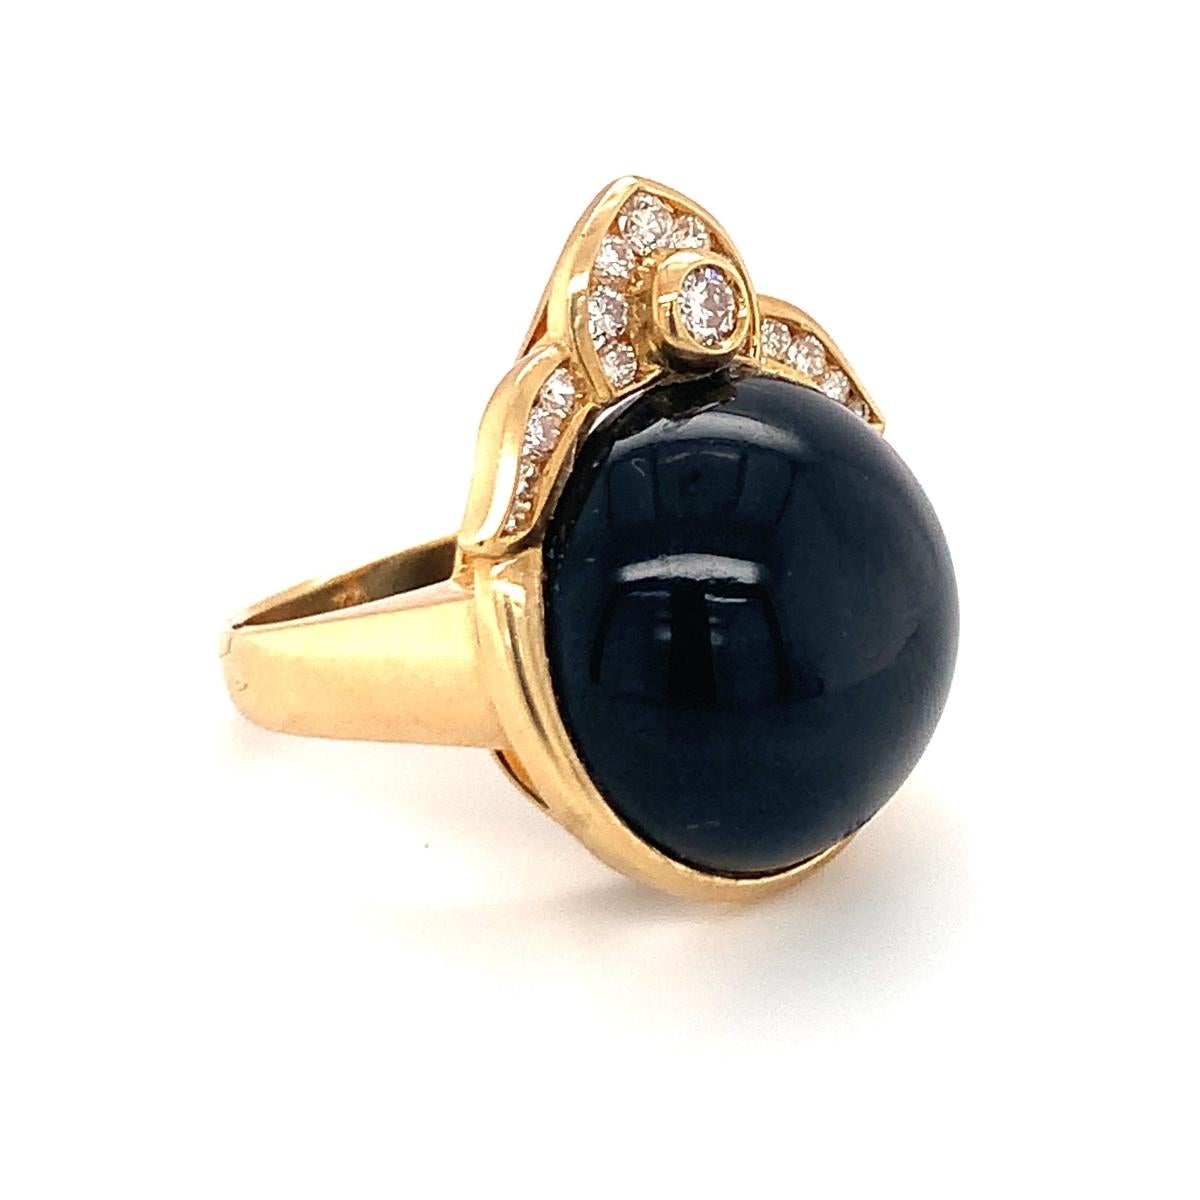 One black onyx and diamond 18K yellow gold ring centering one round cabochon black onyx stone measuring 8 millimeters in diameter with 15 round brilliant cut diamonds weighing approximately 0.75 ct. Crown motif design mount.

Sleek, impressive,